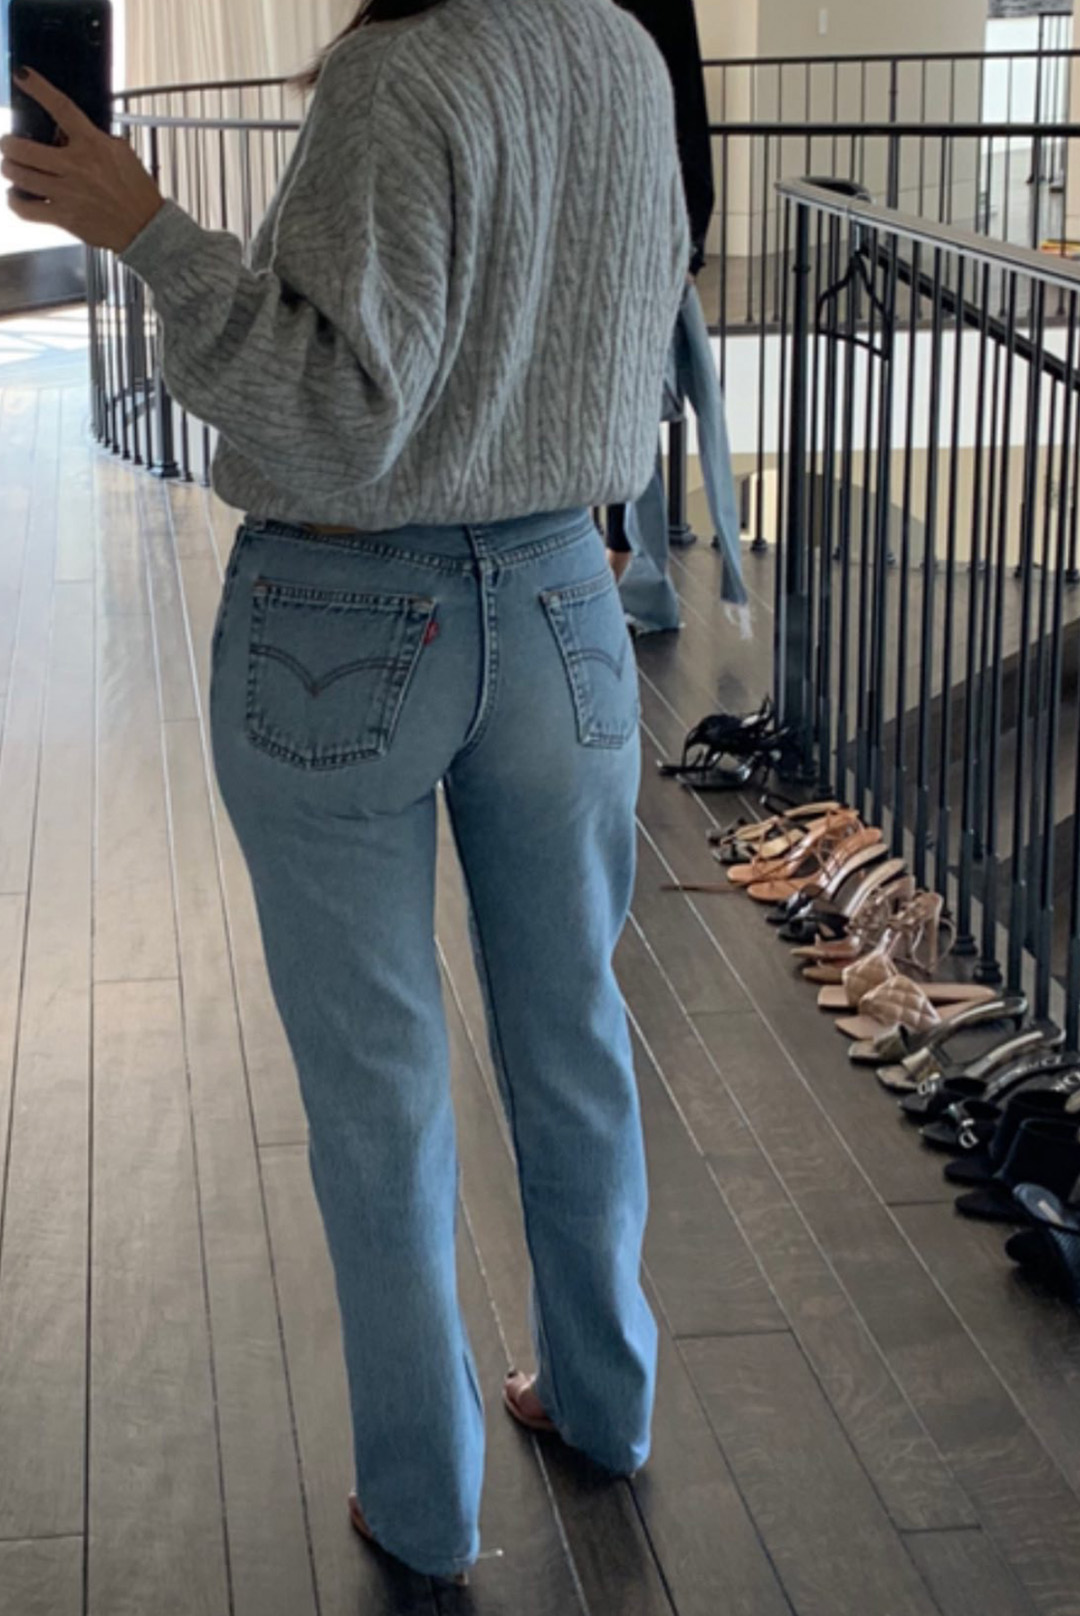 alexander finger recommends ass in them jeans pic